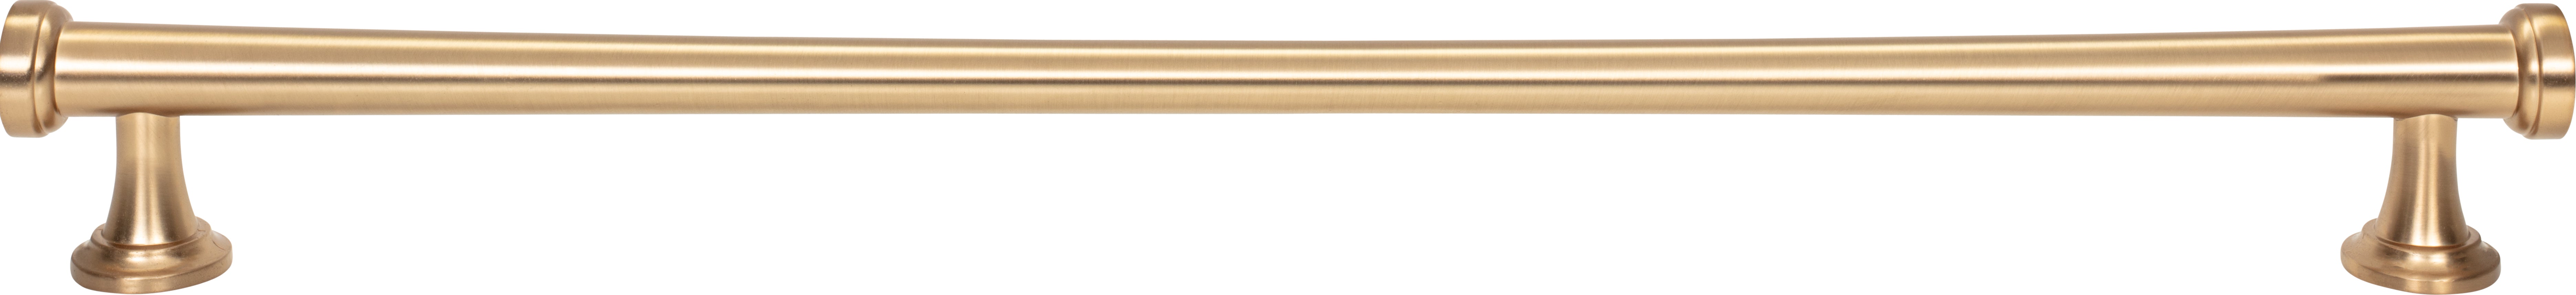 Browning Appliance Pull 18 Inch